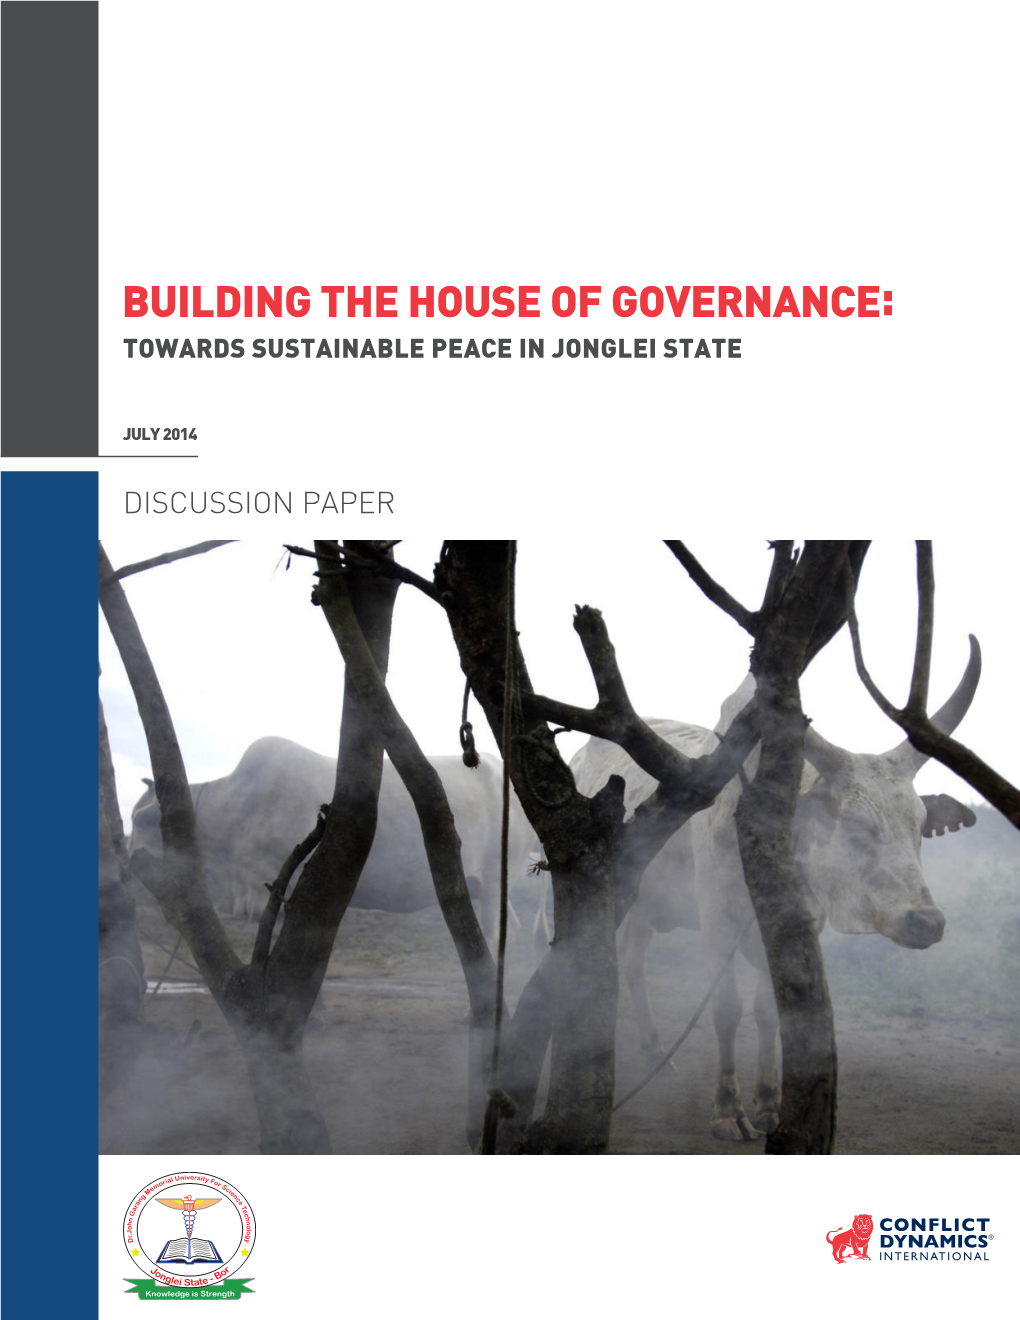 Building the House of Governance: Towards Sustainable Peace in Jonglei State